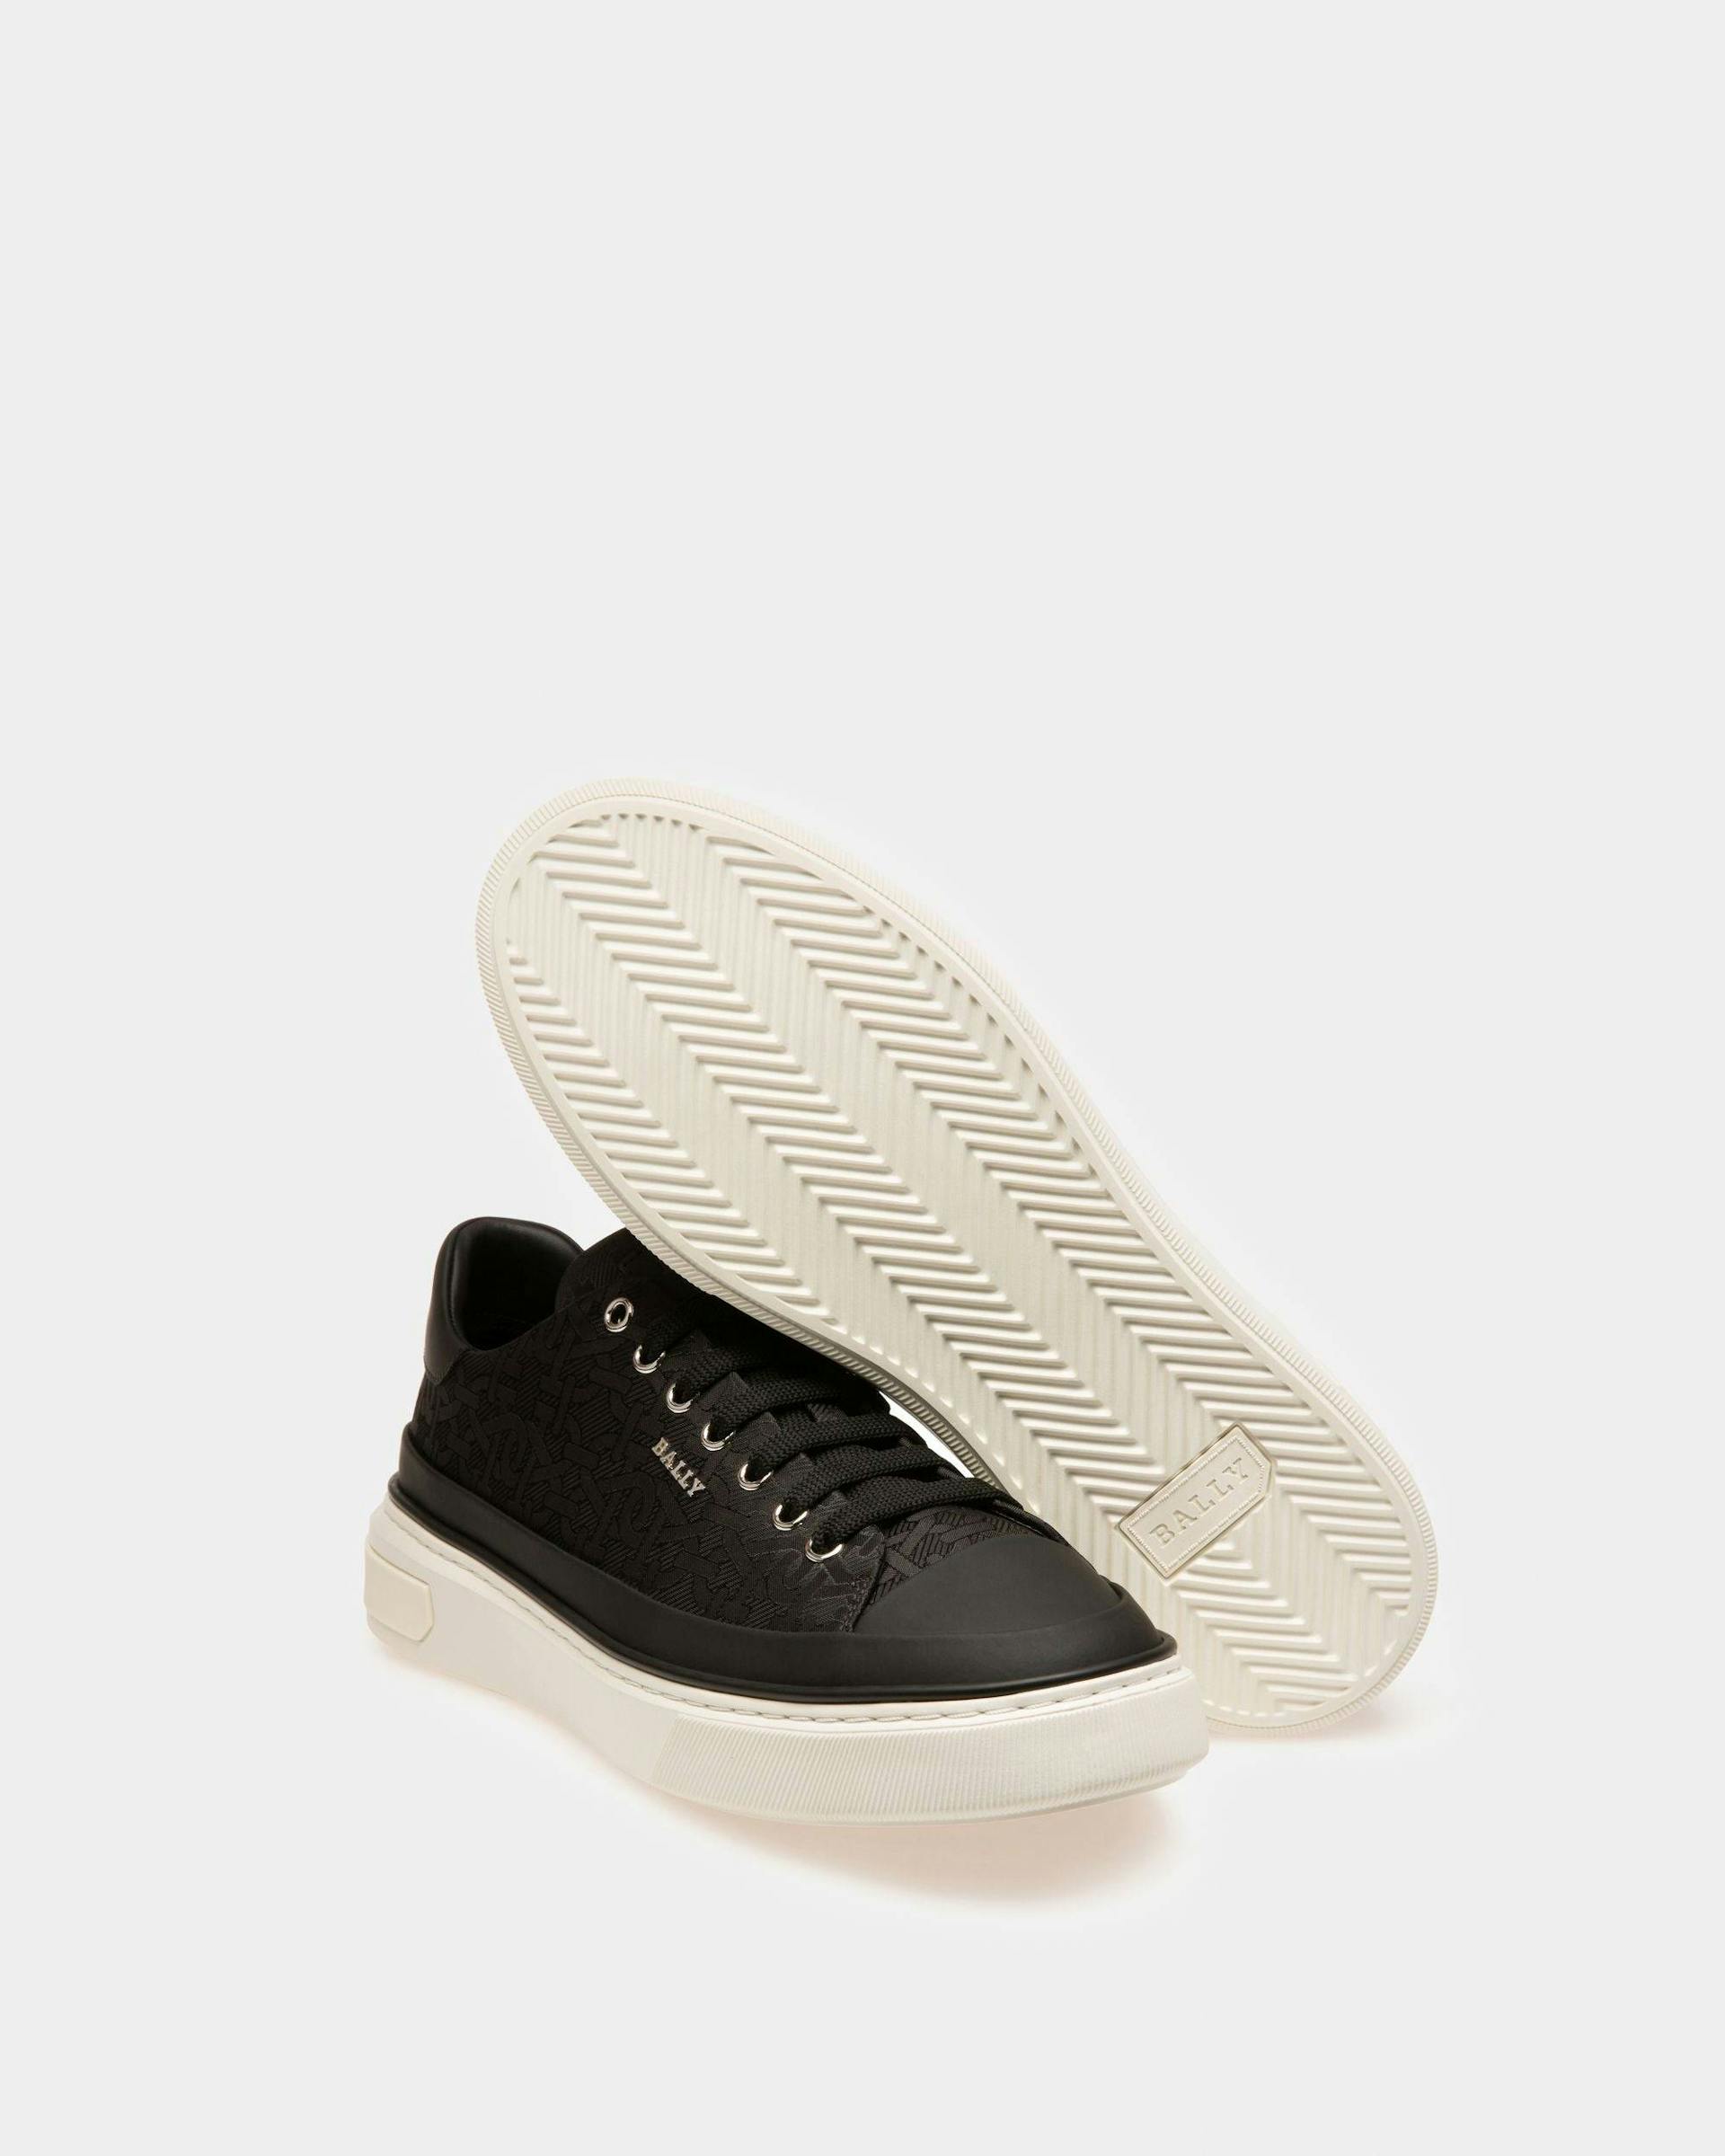 Maily Fabric Sneakers In Black - Men's - Bally - 05